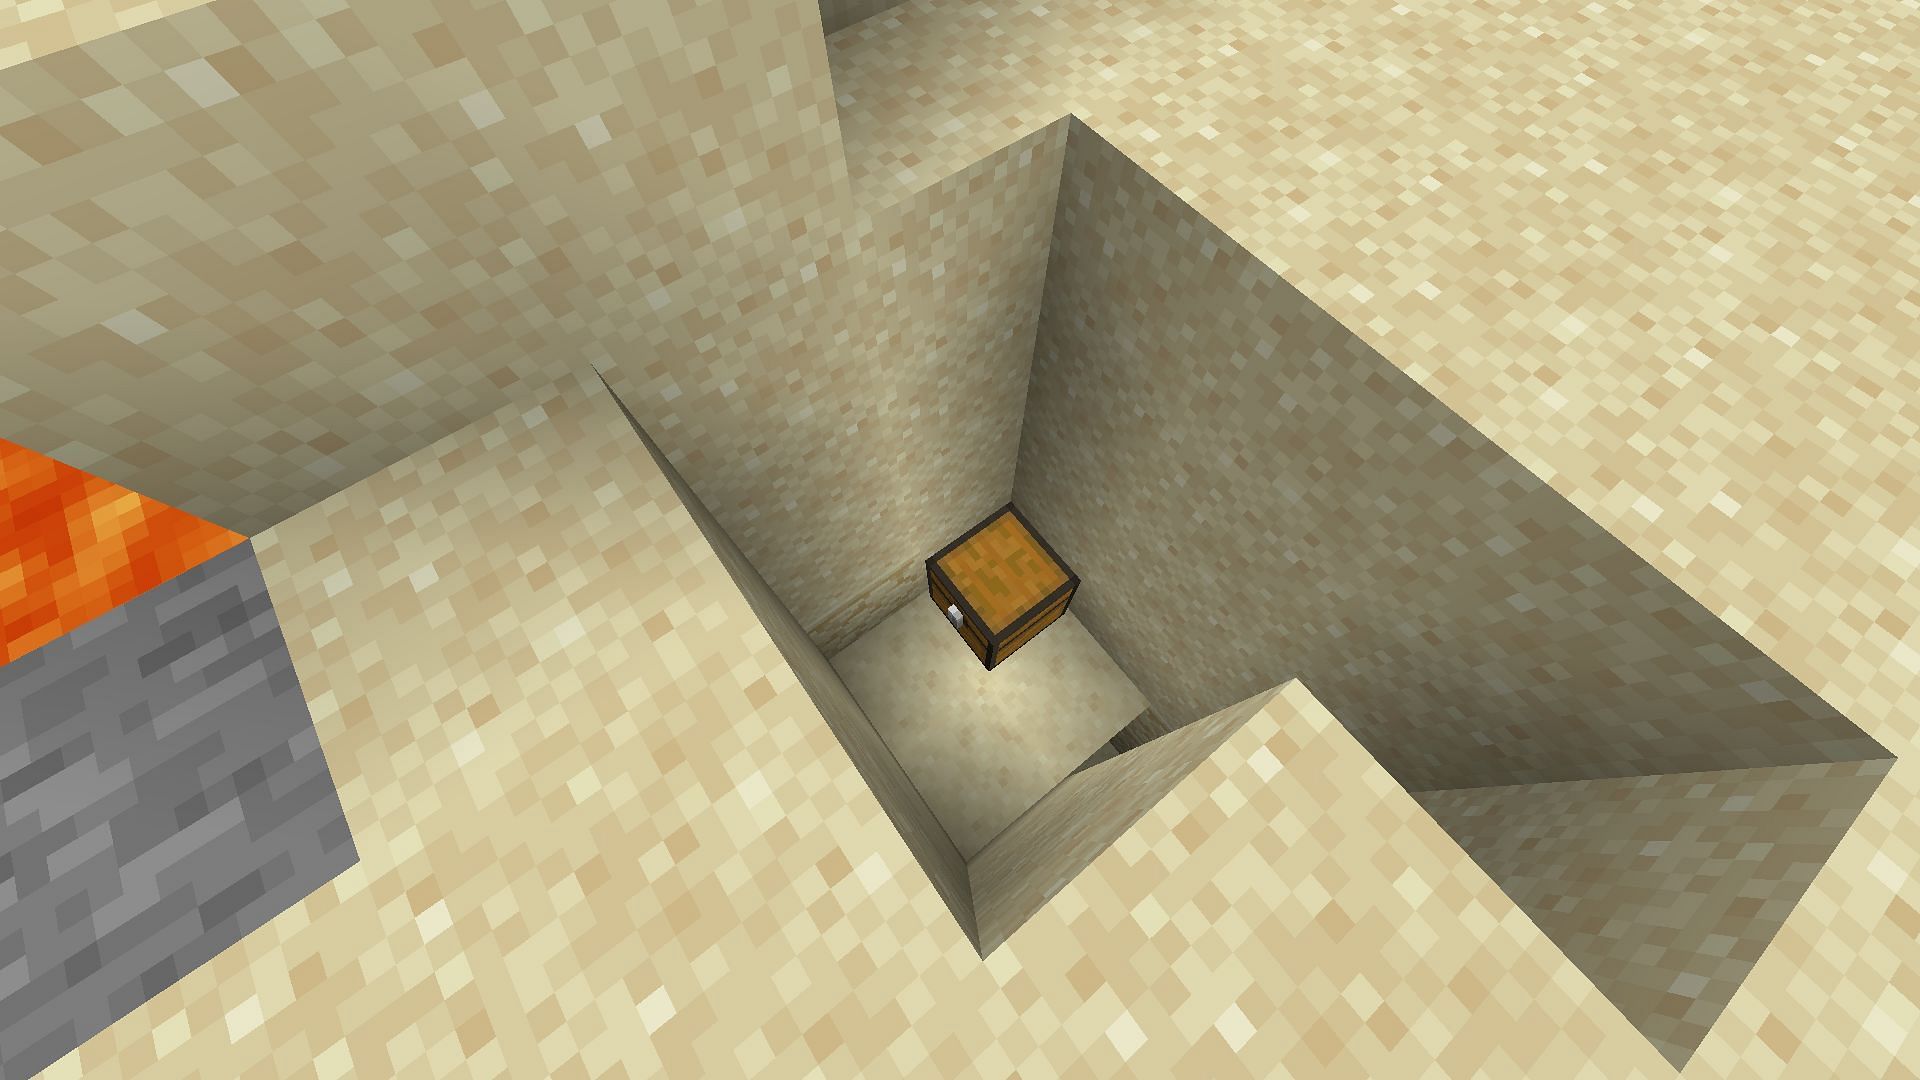 One of the buried treasure present near spawn in Minecraft 1.19 (Image via Mojang)